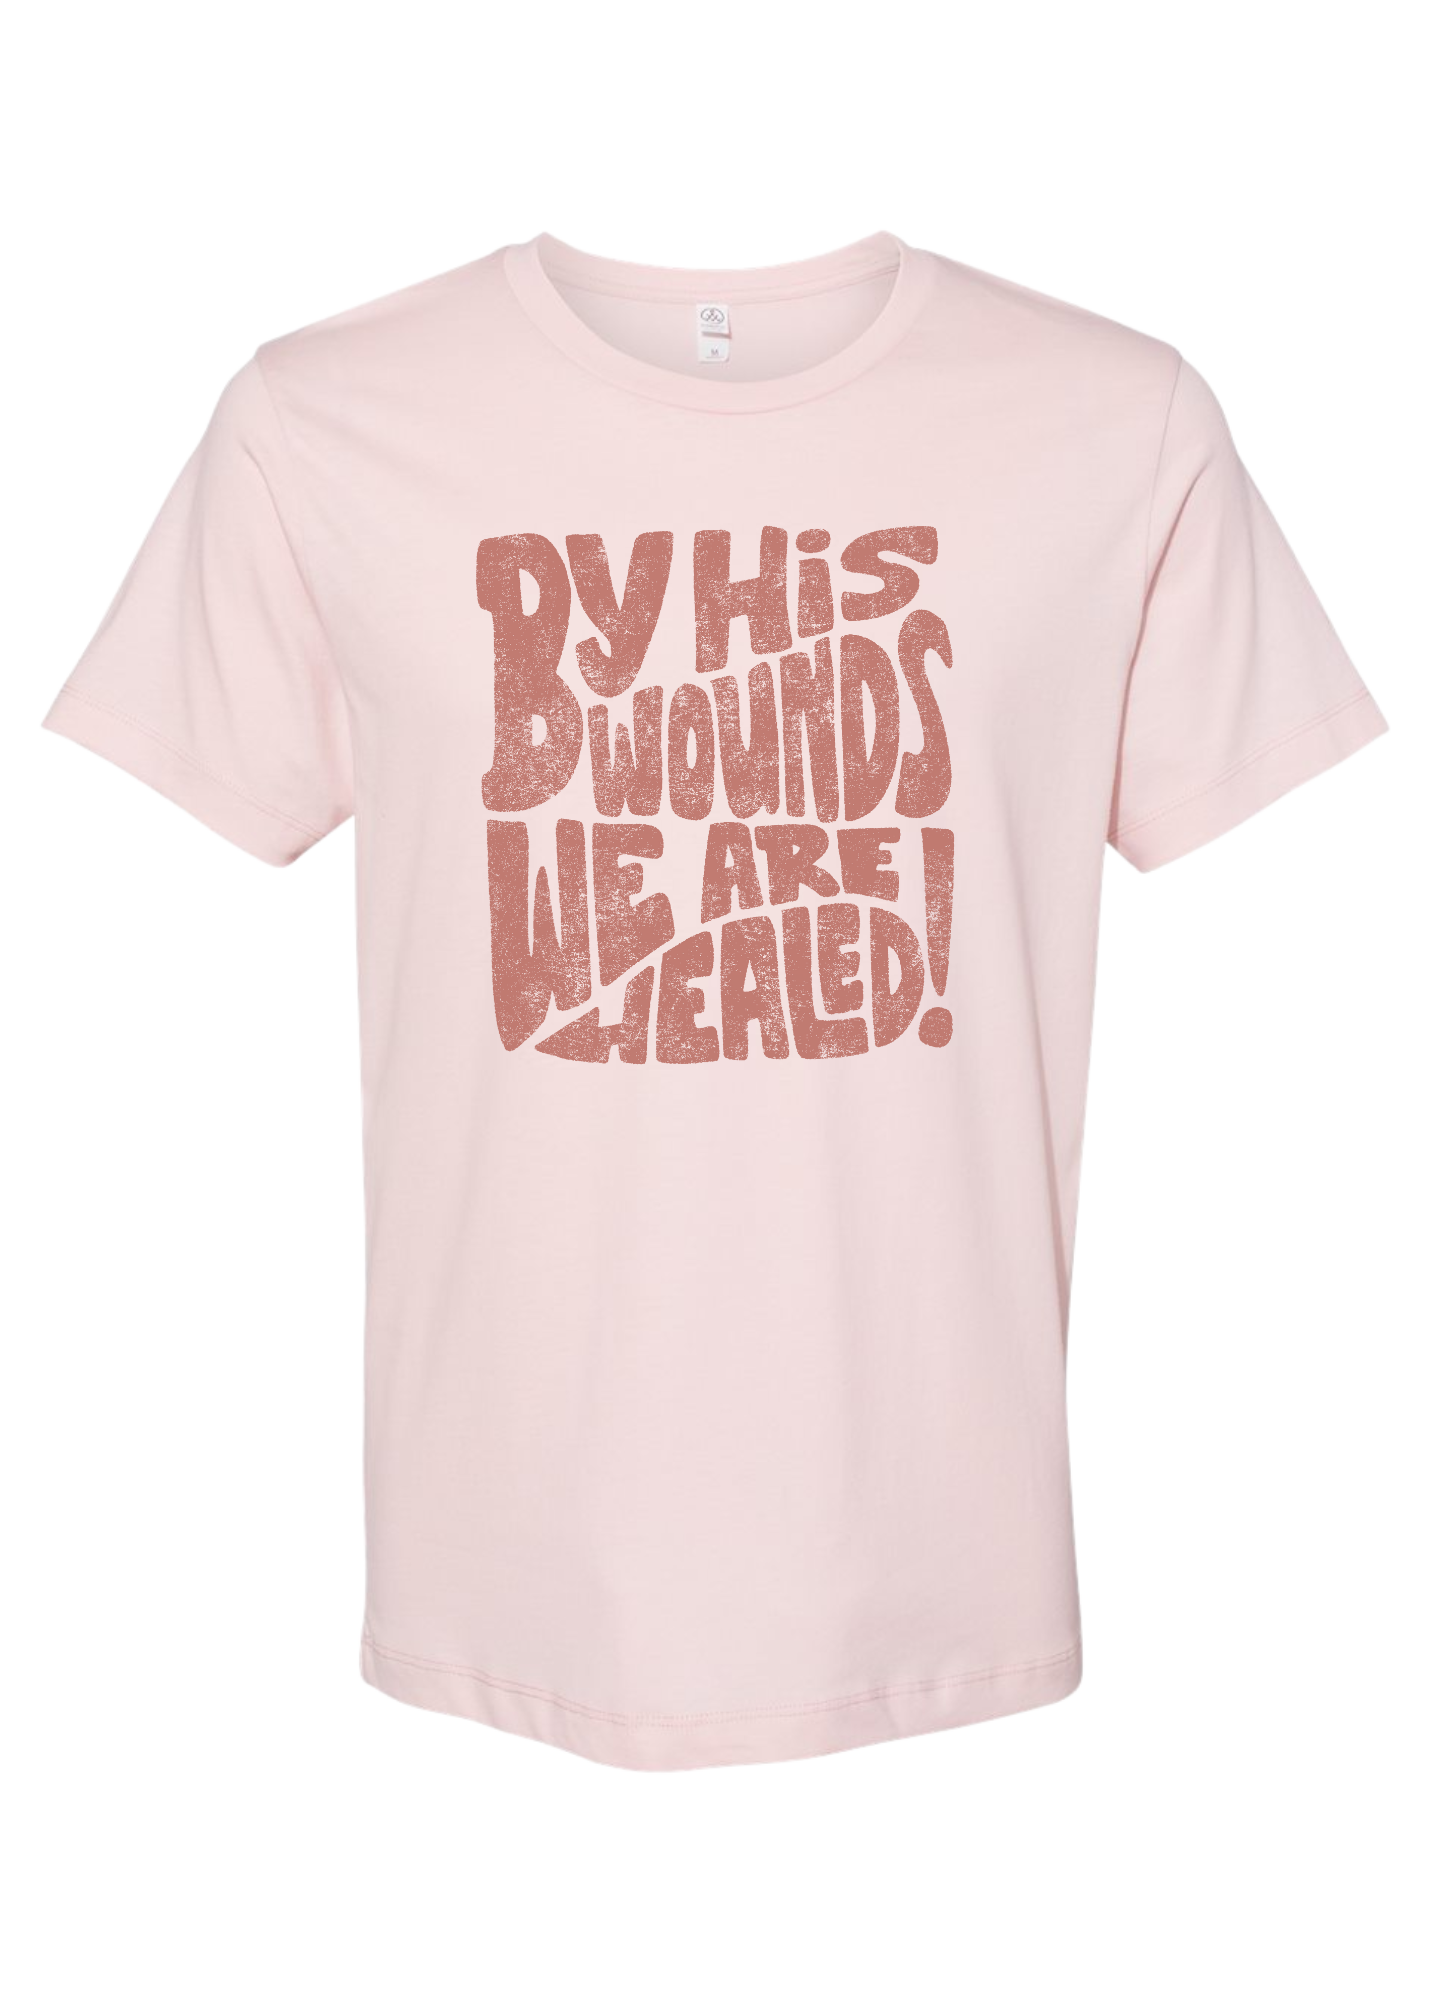 By His Wounds | Kids Tee-Kids Tees-Sister Shirts-Sister Shirts, Cute & Custom Tees for Mama & Littles in Trussville, Alabama.